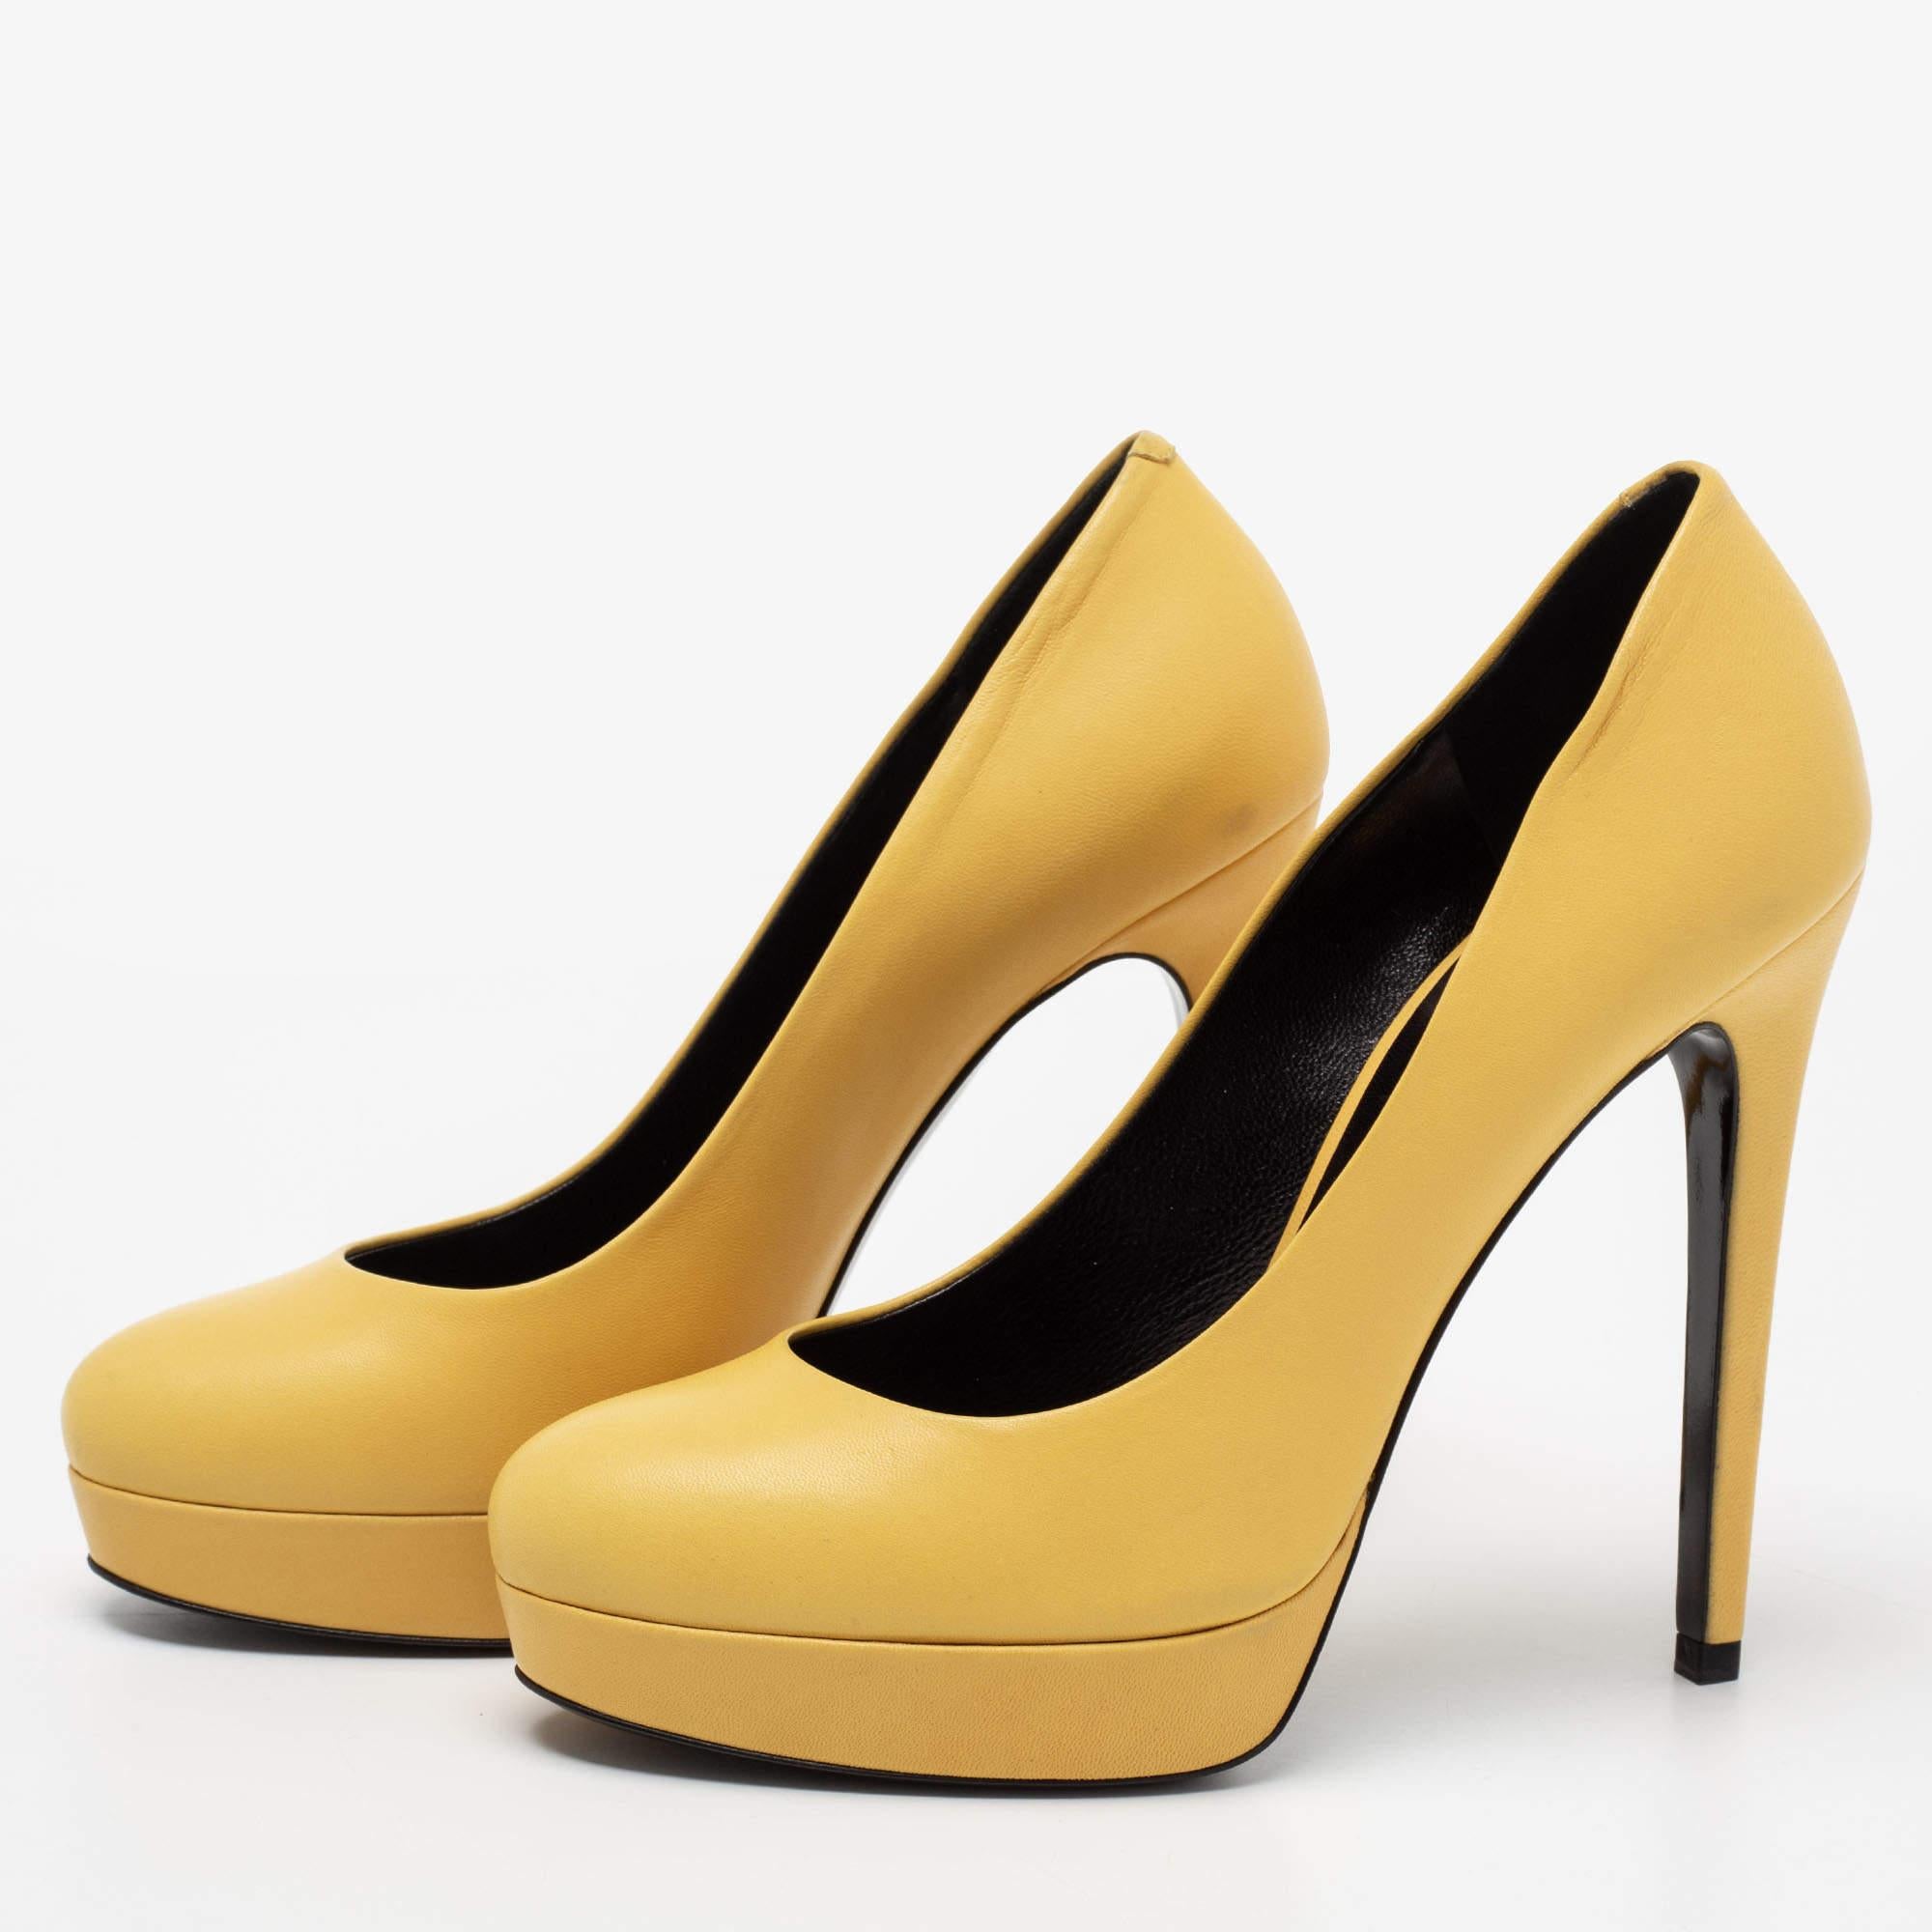 Barbara Bui Yellow Leather Platform Pumps Size 38 For Sale 4